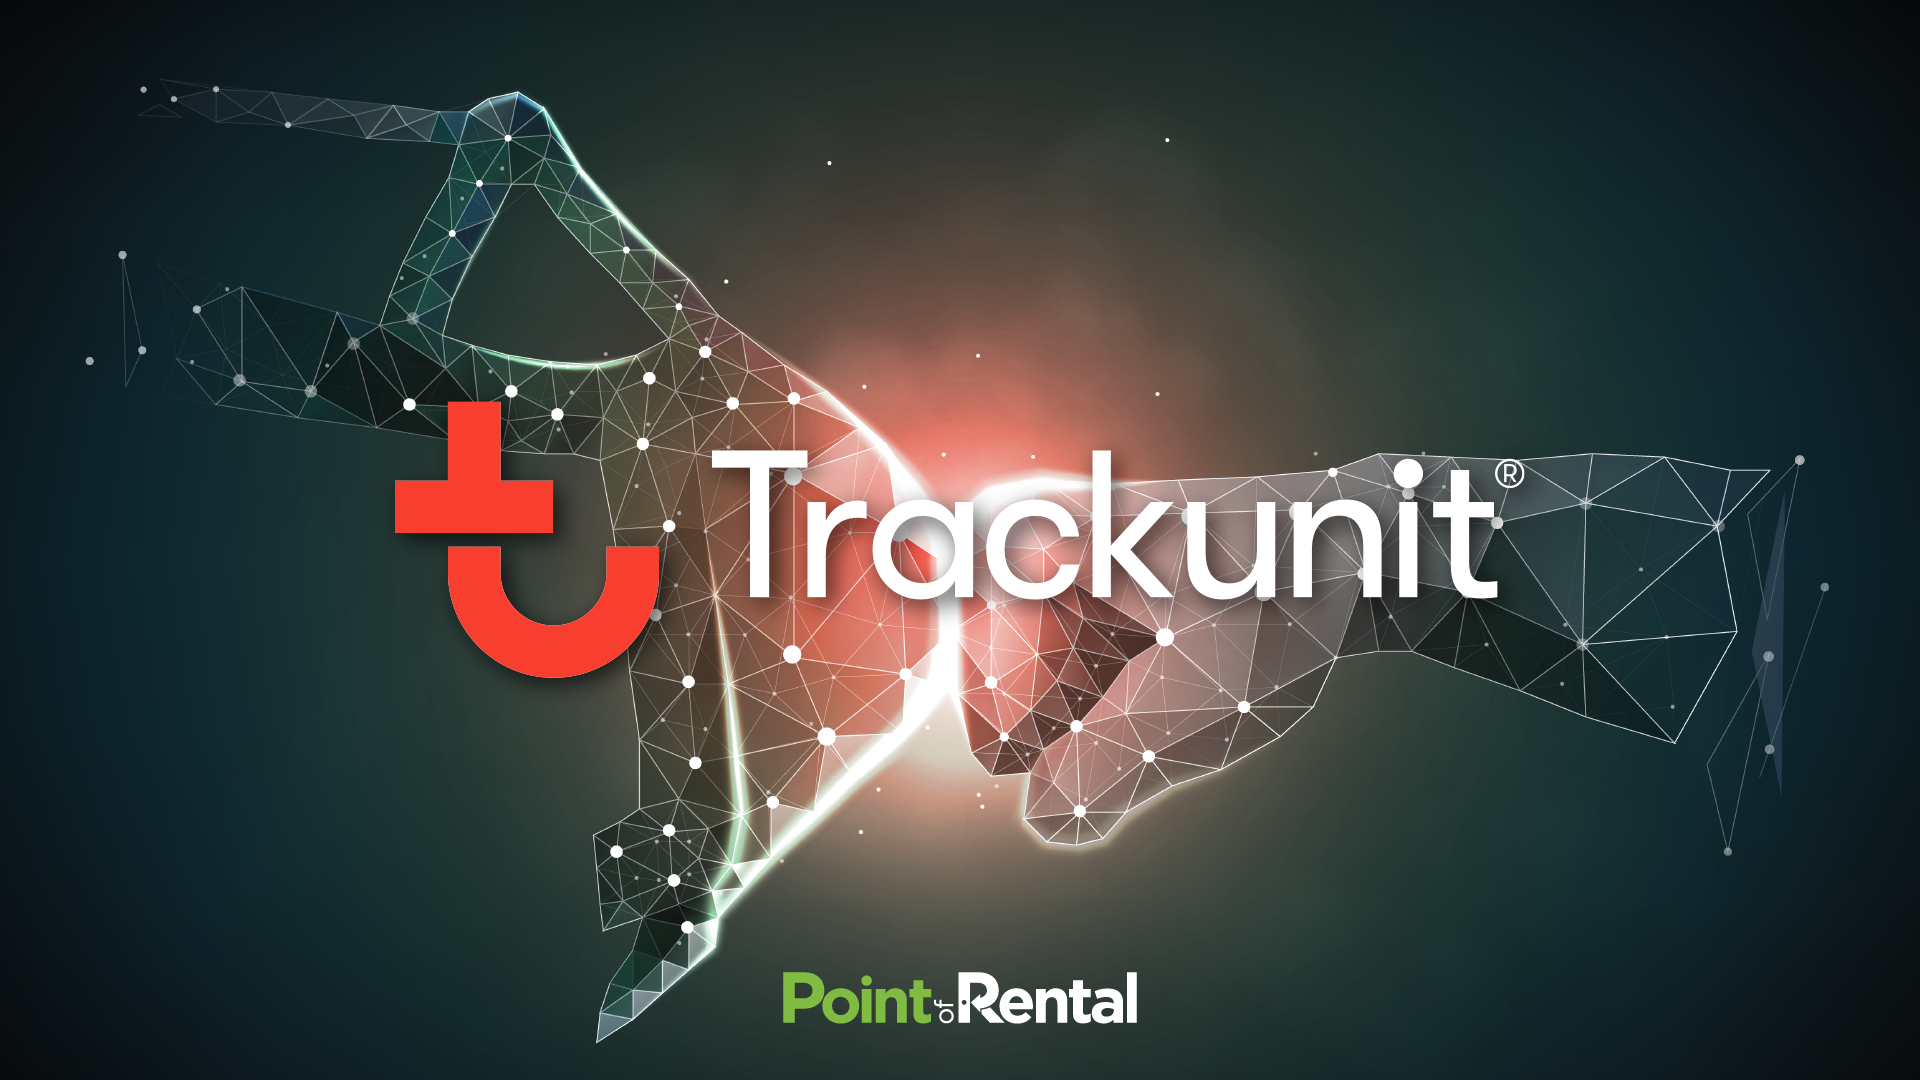 Trackunit and Point of Rental are partnering up to deliver new functionality.